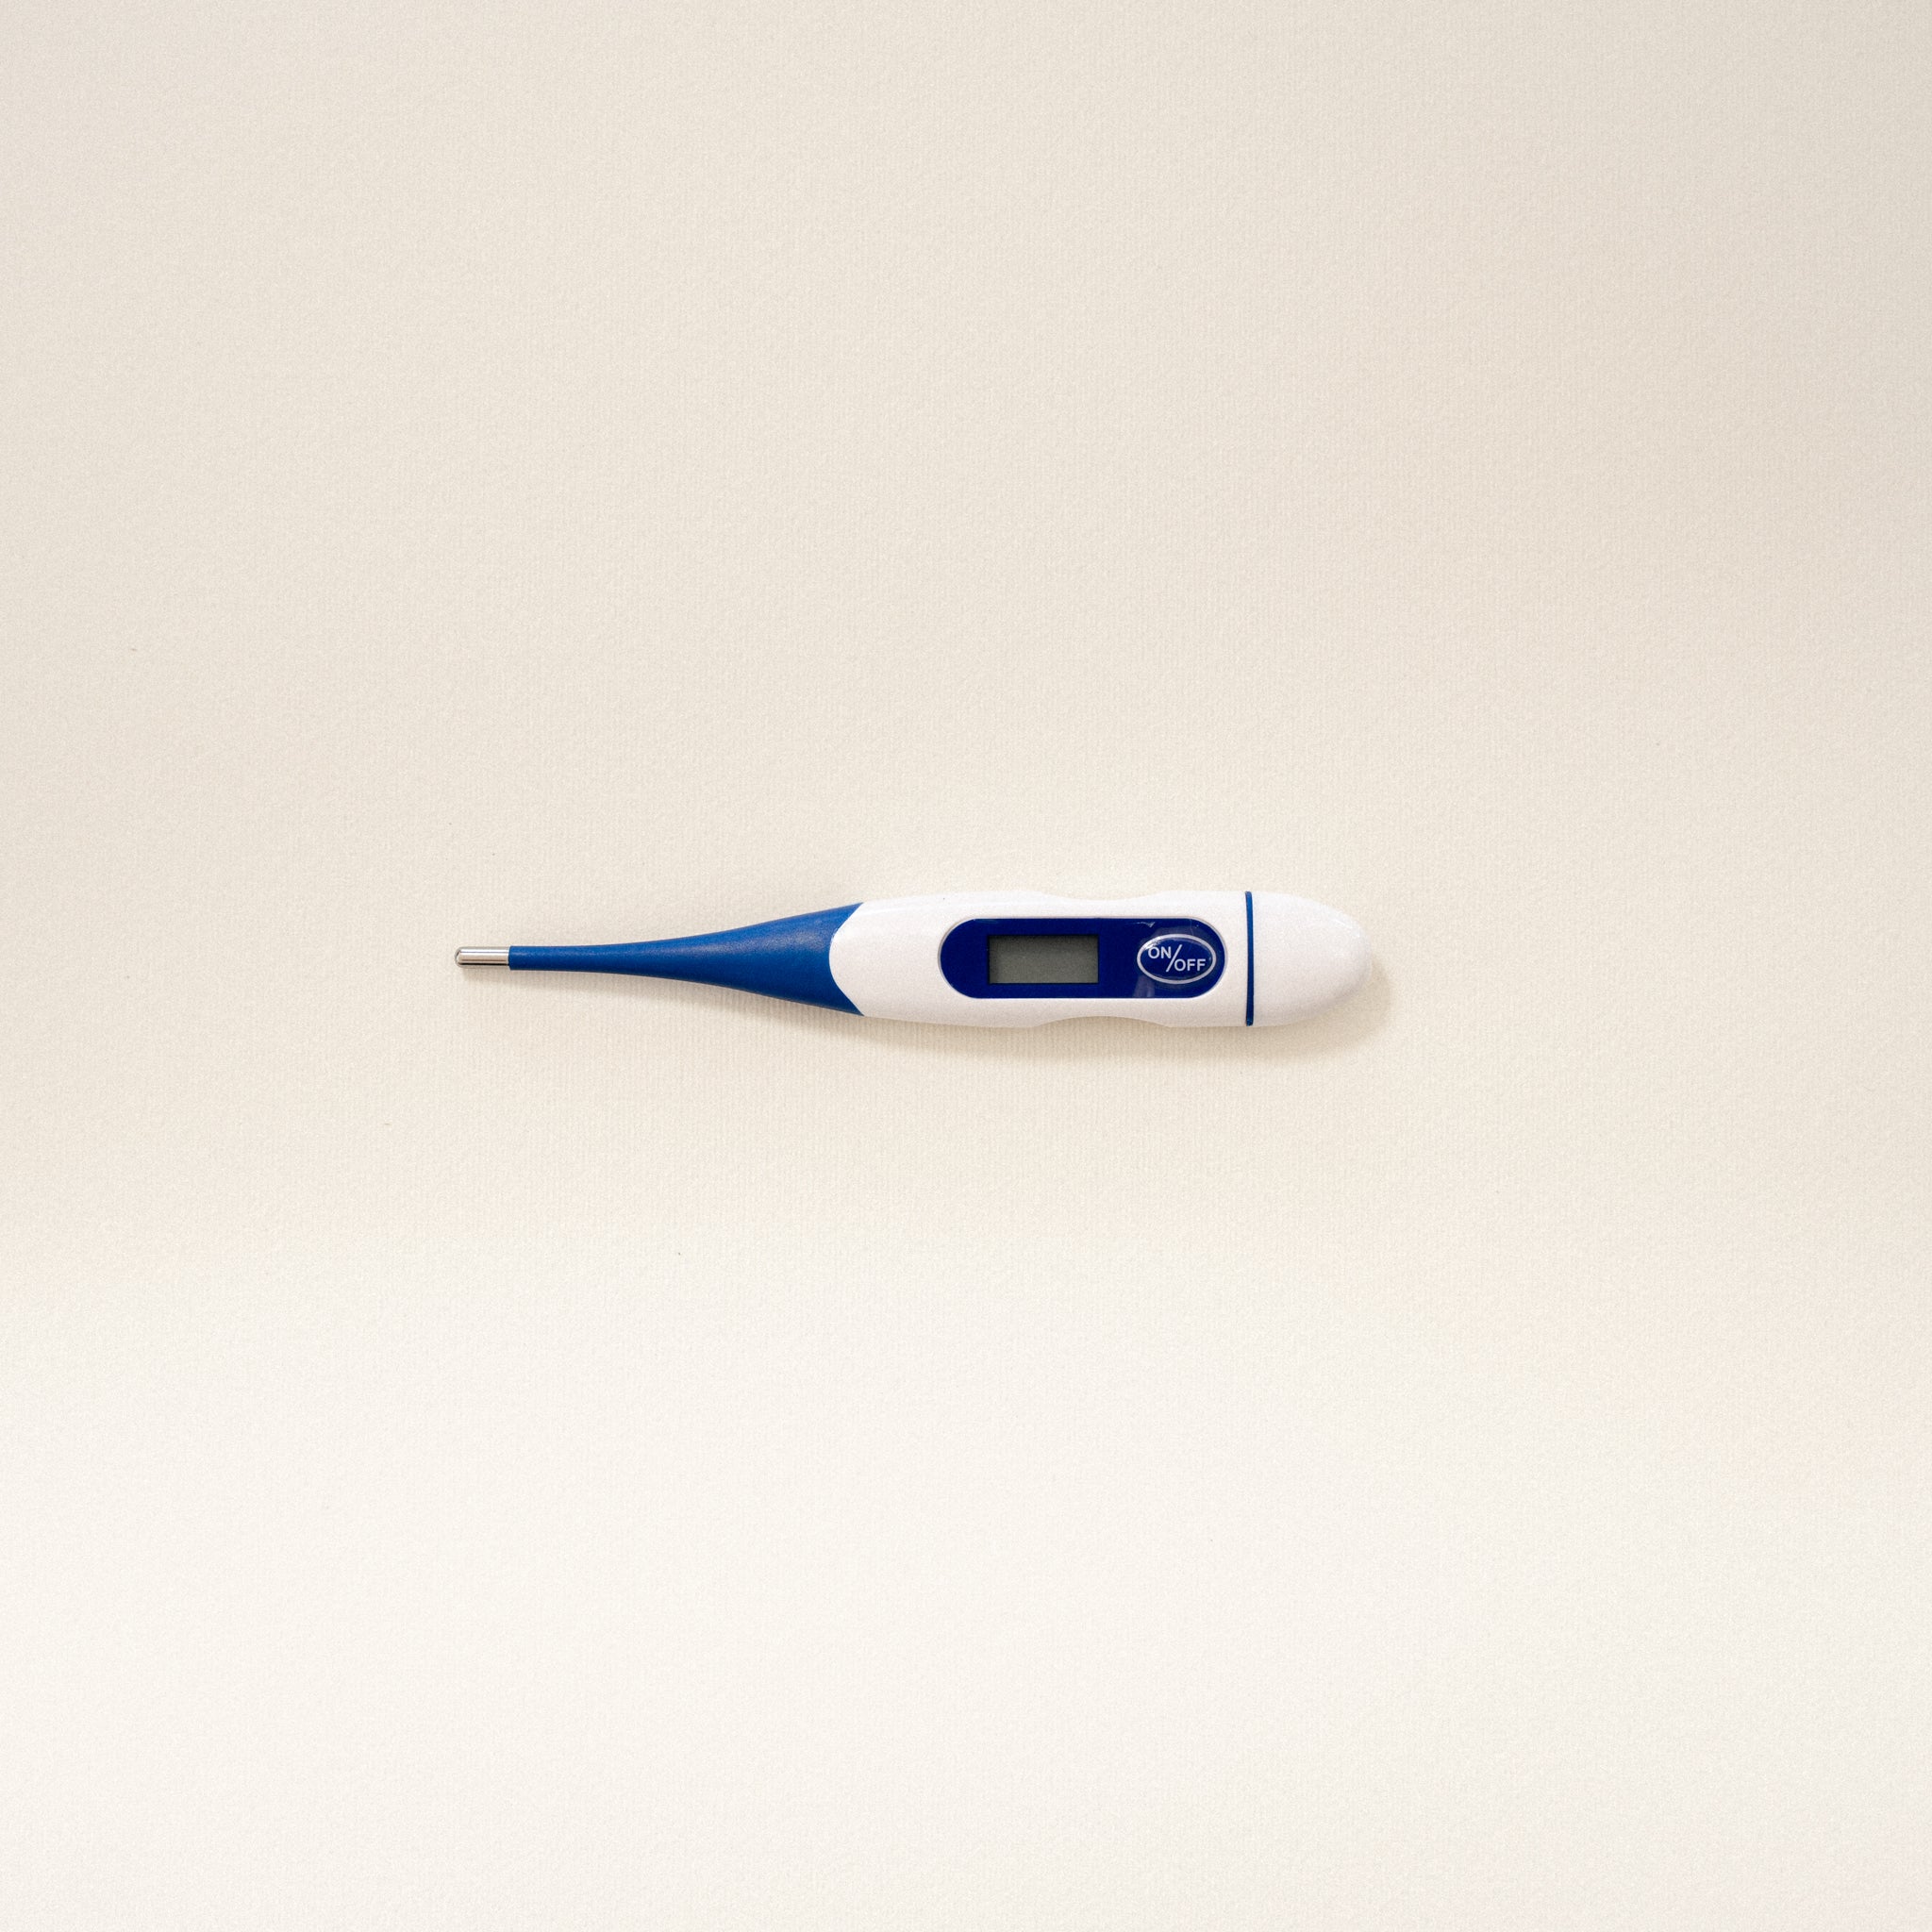 ValMed Digital Thermometer with flexible tip